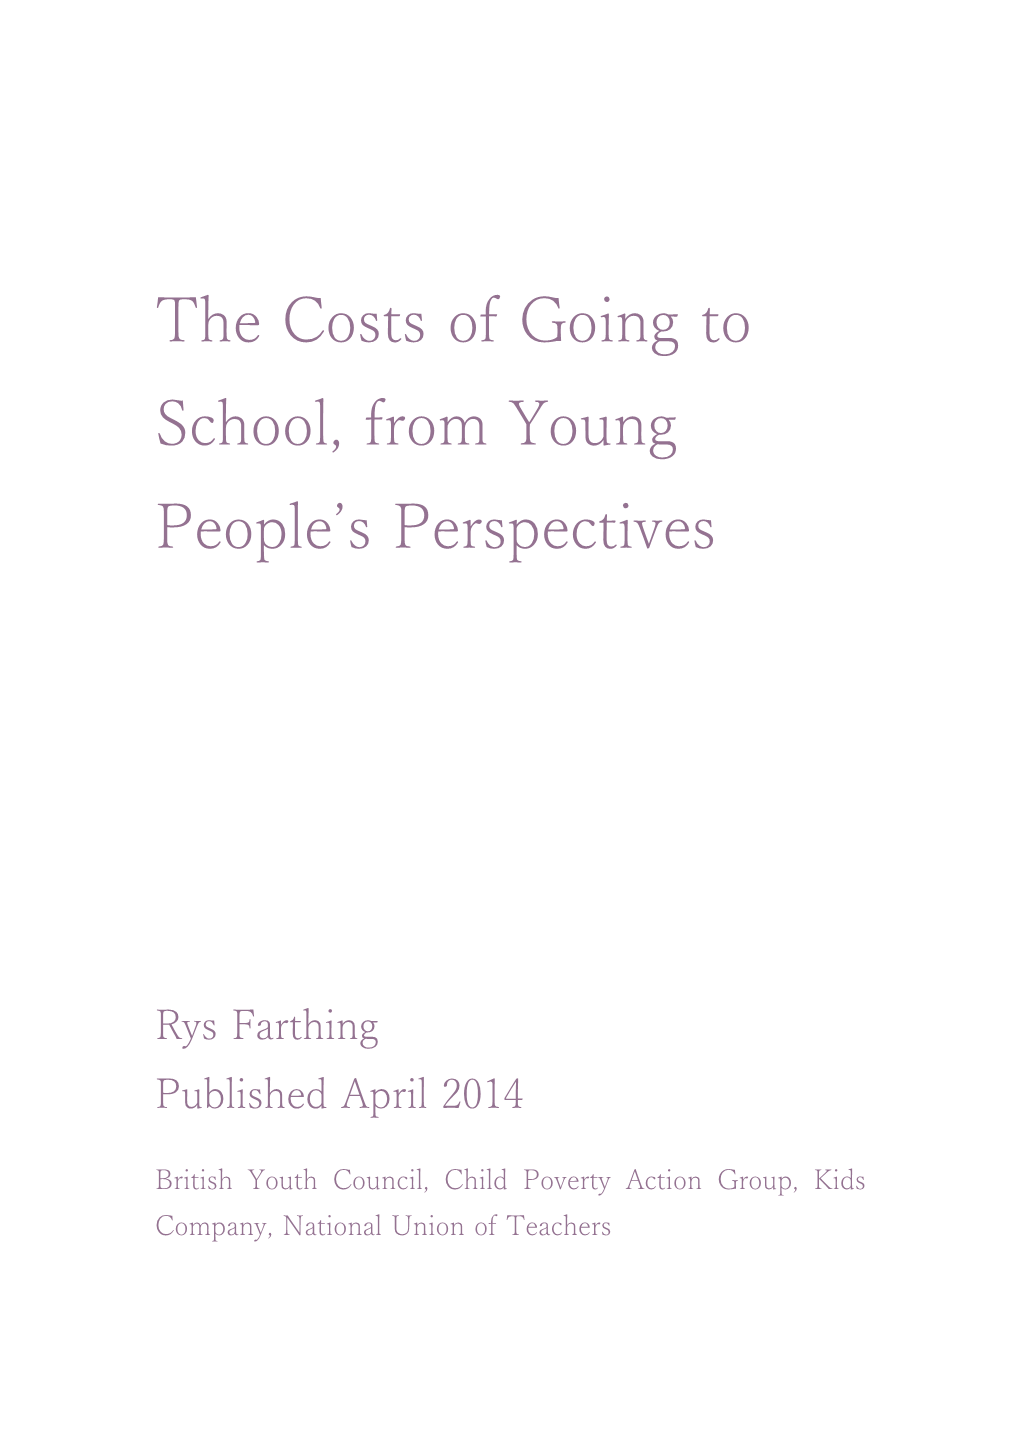 The Cost of Going to School, from Young People S Perspectives